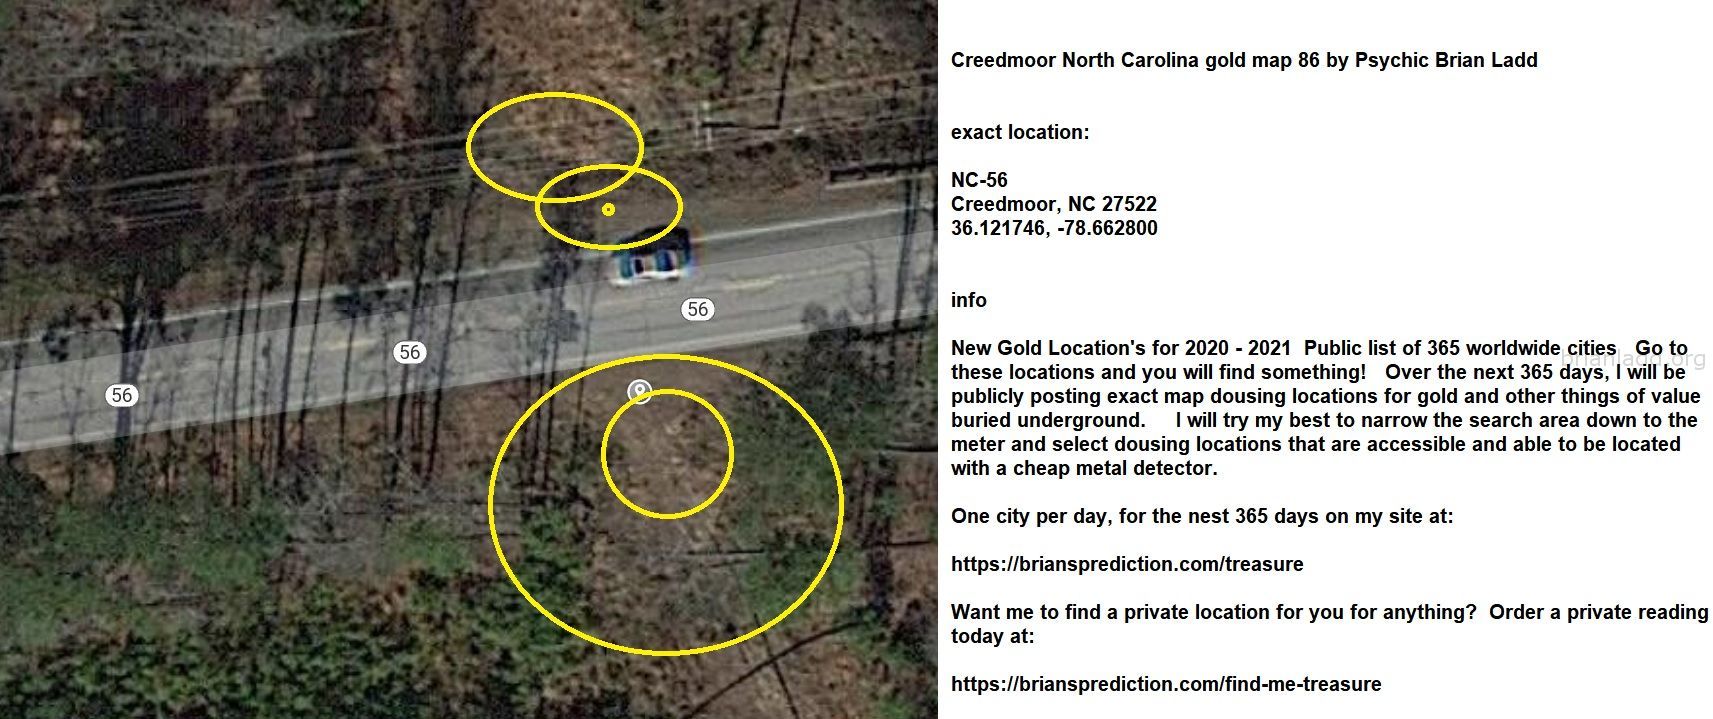 Creedmoor North Carolina Gold Map 86 By Psychic Brian Ladd - Creedmoor North Carolina Gold Map 86 By Psychic Brian Ladd ...
Creedmoor North Carolina Gold Map 86 By Psychic Brian Ladd  Exact Location:  Nc-56  Creedmoor, Nc 27522  36.121746, -78.662800  Info  New Gold Location'S For 2020 - 2021  Public List Of 365 Worldwide Cities  Go To These Locations And You Will Find Something!  Over The Next 365 Days, I Will Be Publicly Posting Exact Map Dousing Locations For Gold And Other Things Of Value Buried Underground.  I Will Try My Best To Narrow The Search Area Down To The Meter And Select Dousing Locations That Are Accessible And Able To Be Located With A Cheap Metal Detector.  One City Per Day, For The Nest 365 Days On My Site At:   https://briansprediction.com/Treasure  Want Me To Find A Private Location For You For Anything?  Order A Private Reading Today At:   https://briansprediction.com/Find-Me-Treasure
